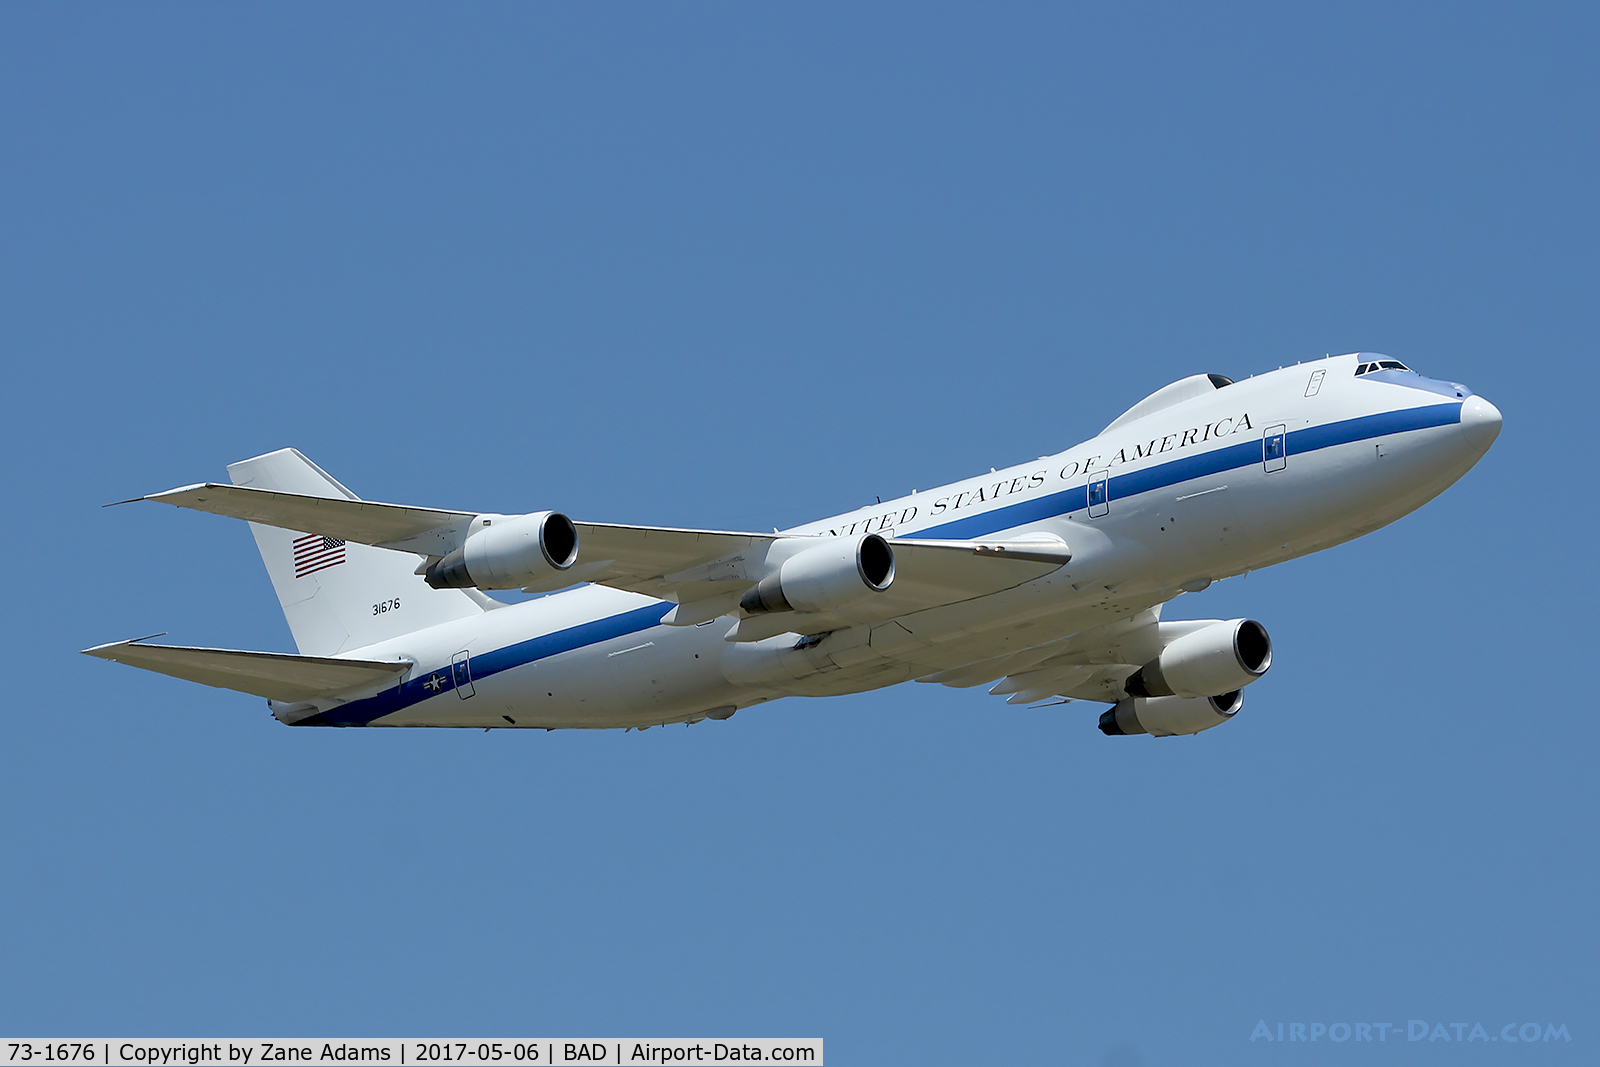 73-1676, 1973 Boeing E-4B C/N 20682, Barksdale AFB 2017 Defenders of Liberty Airshow